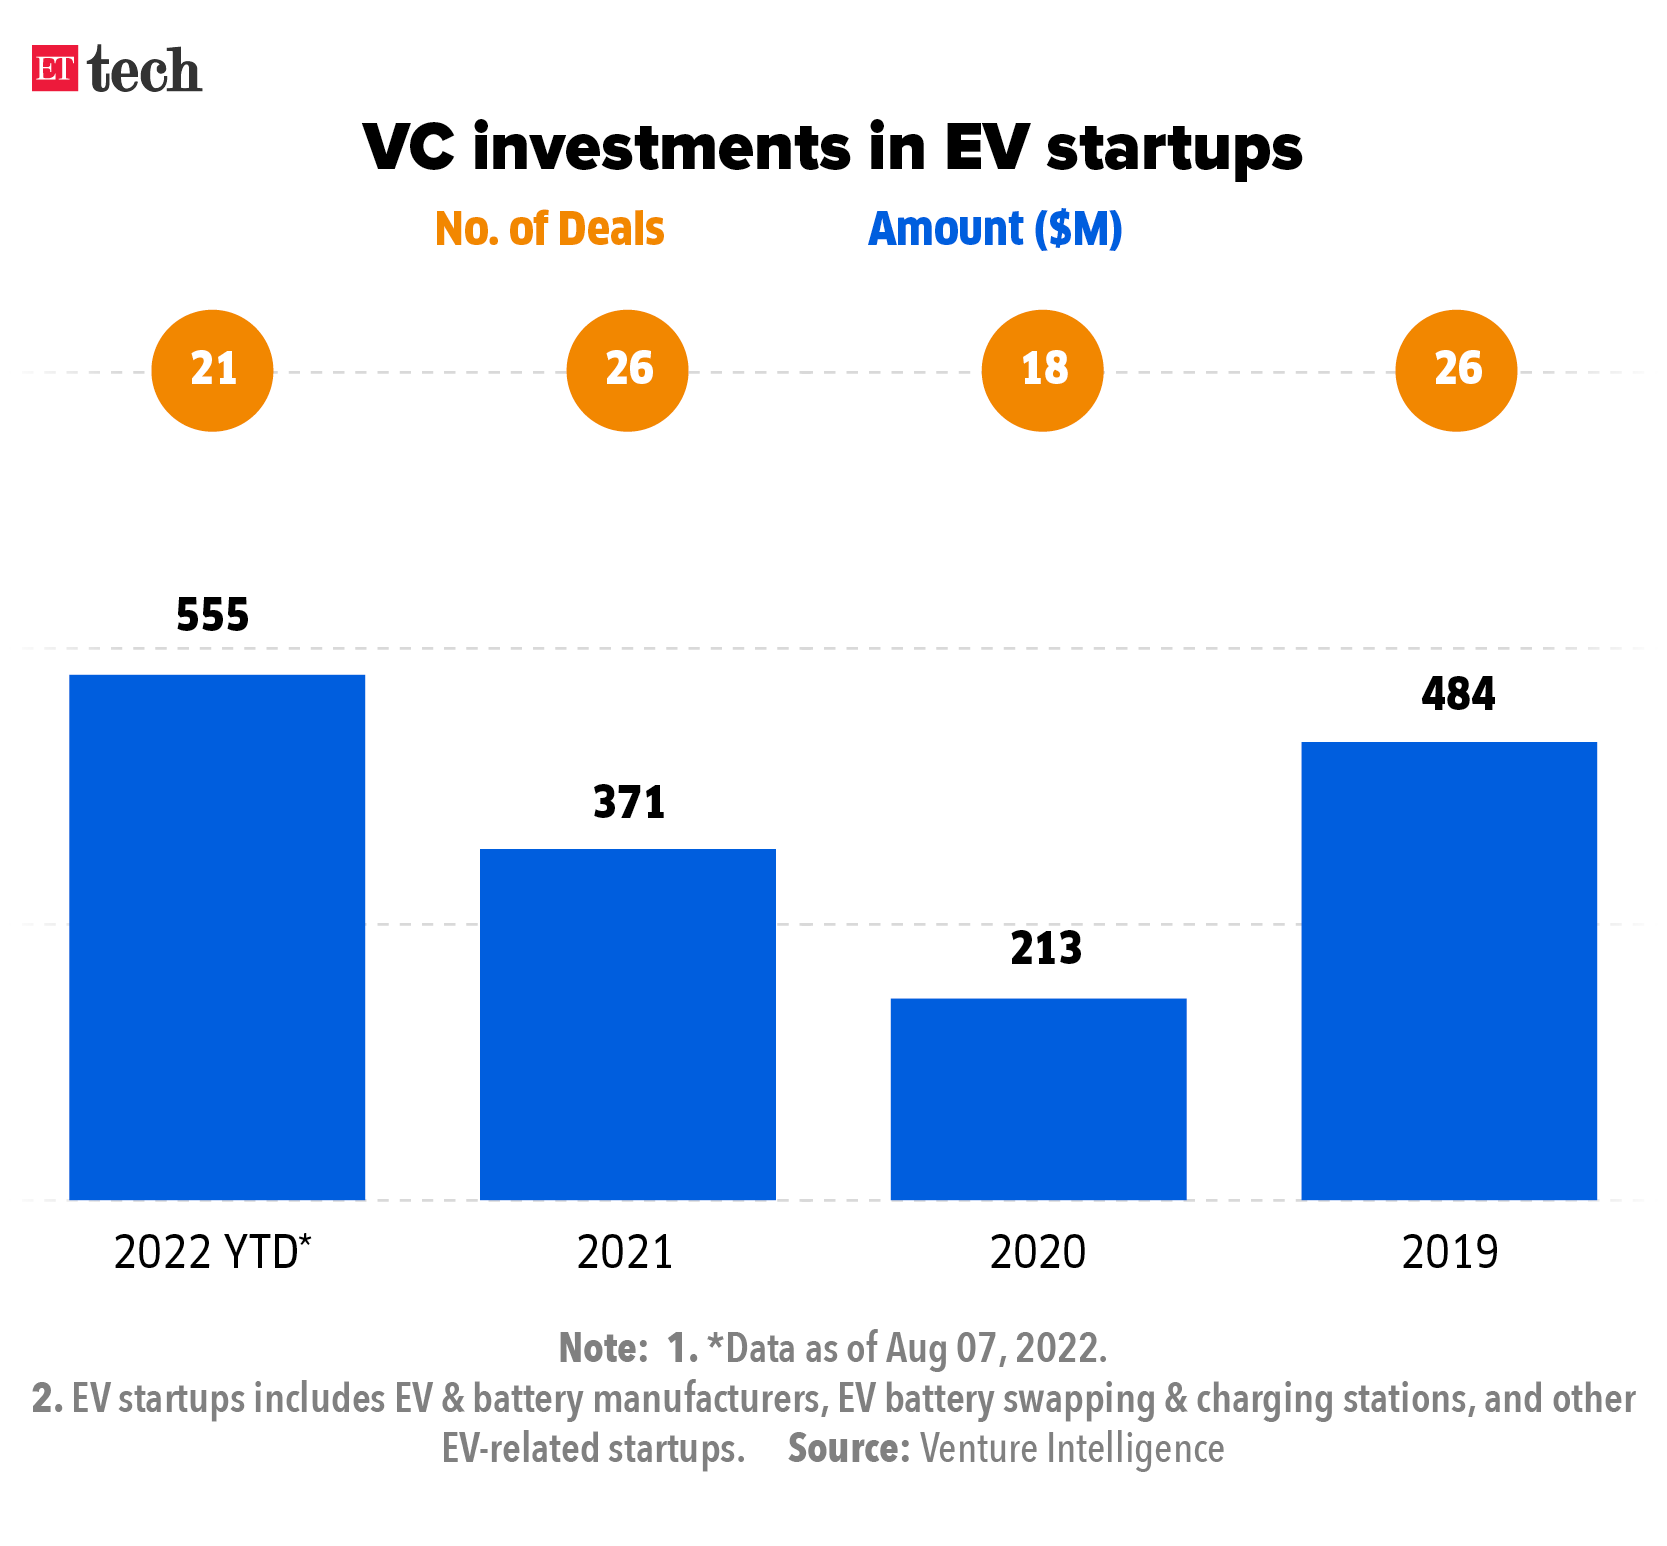 VC investments in EV startups_Graphic_ETTECH